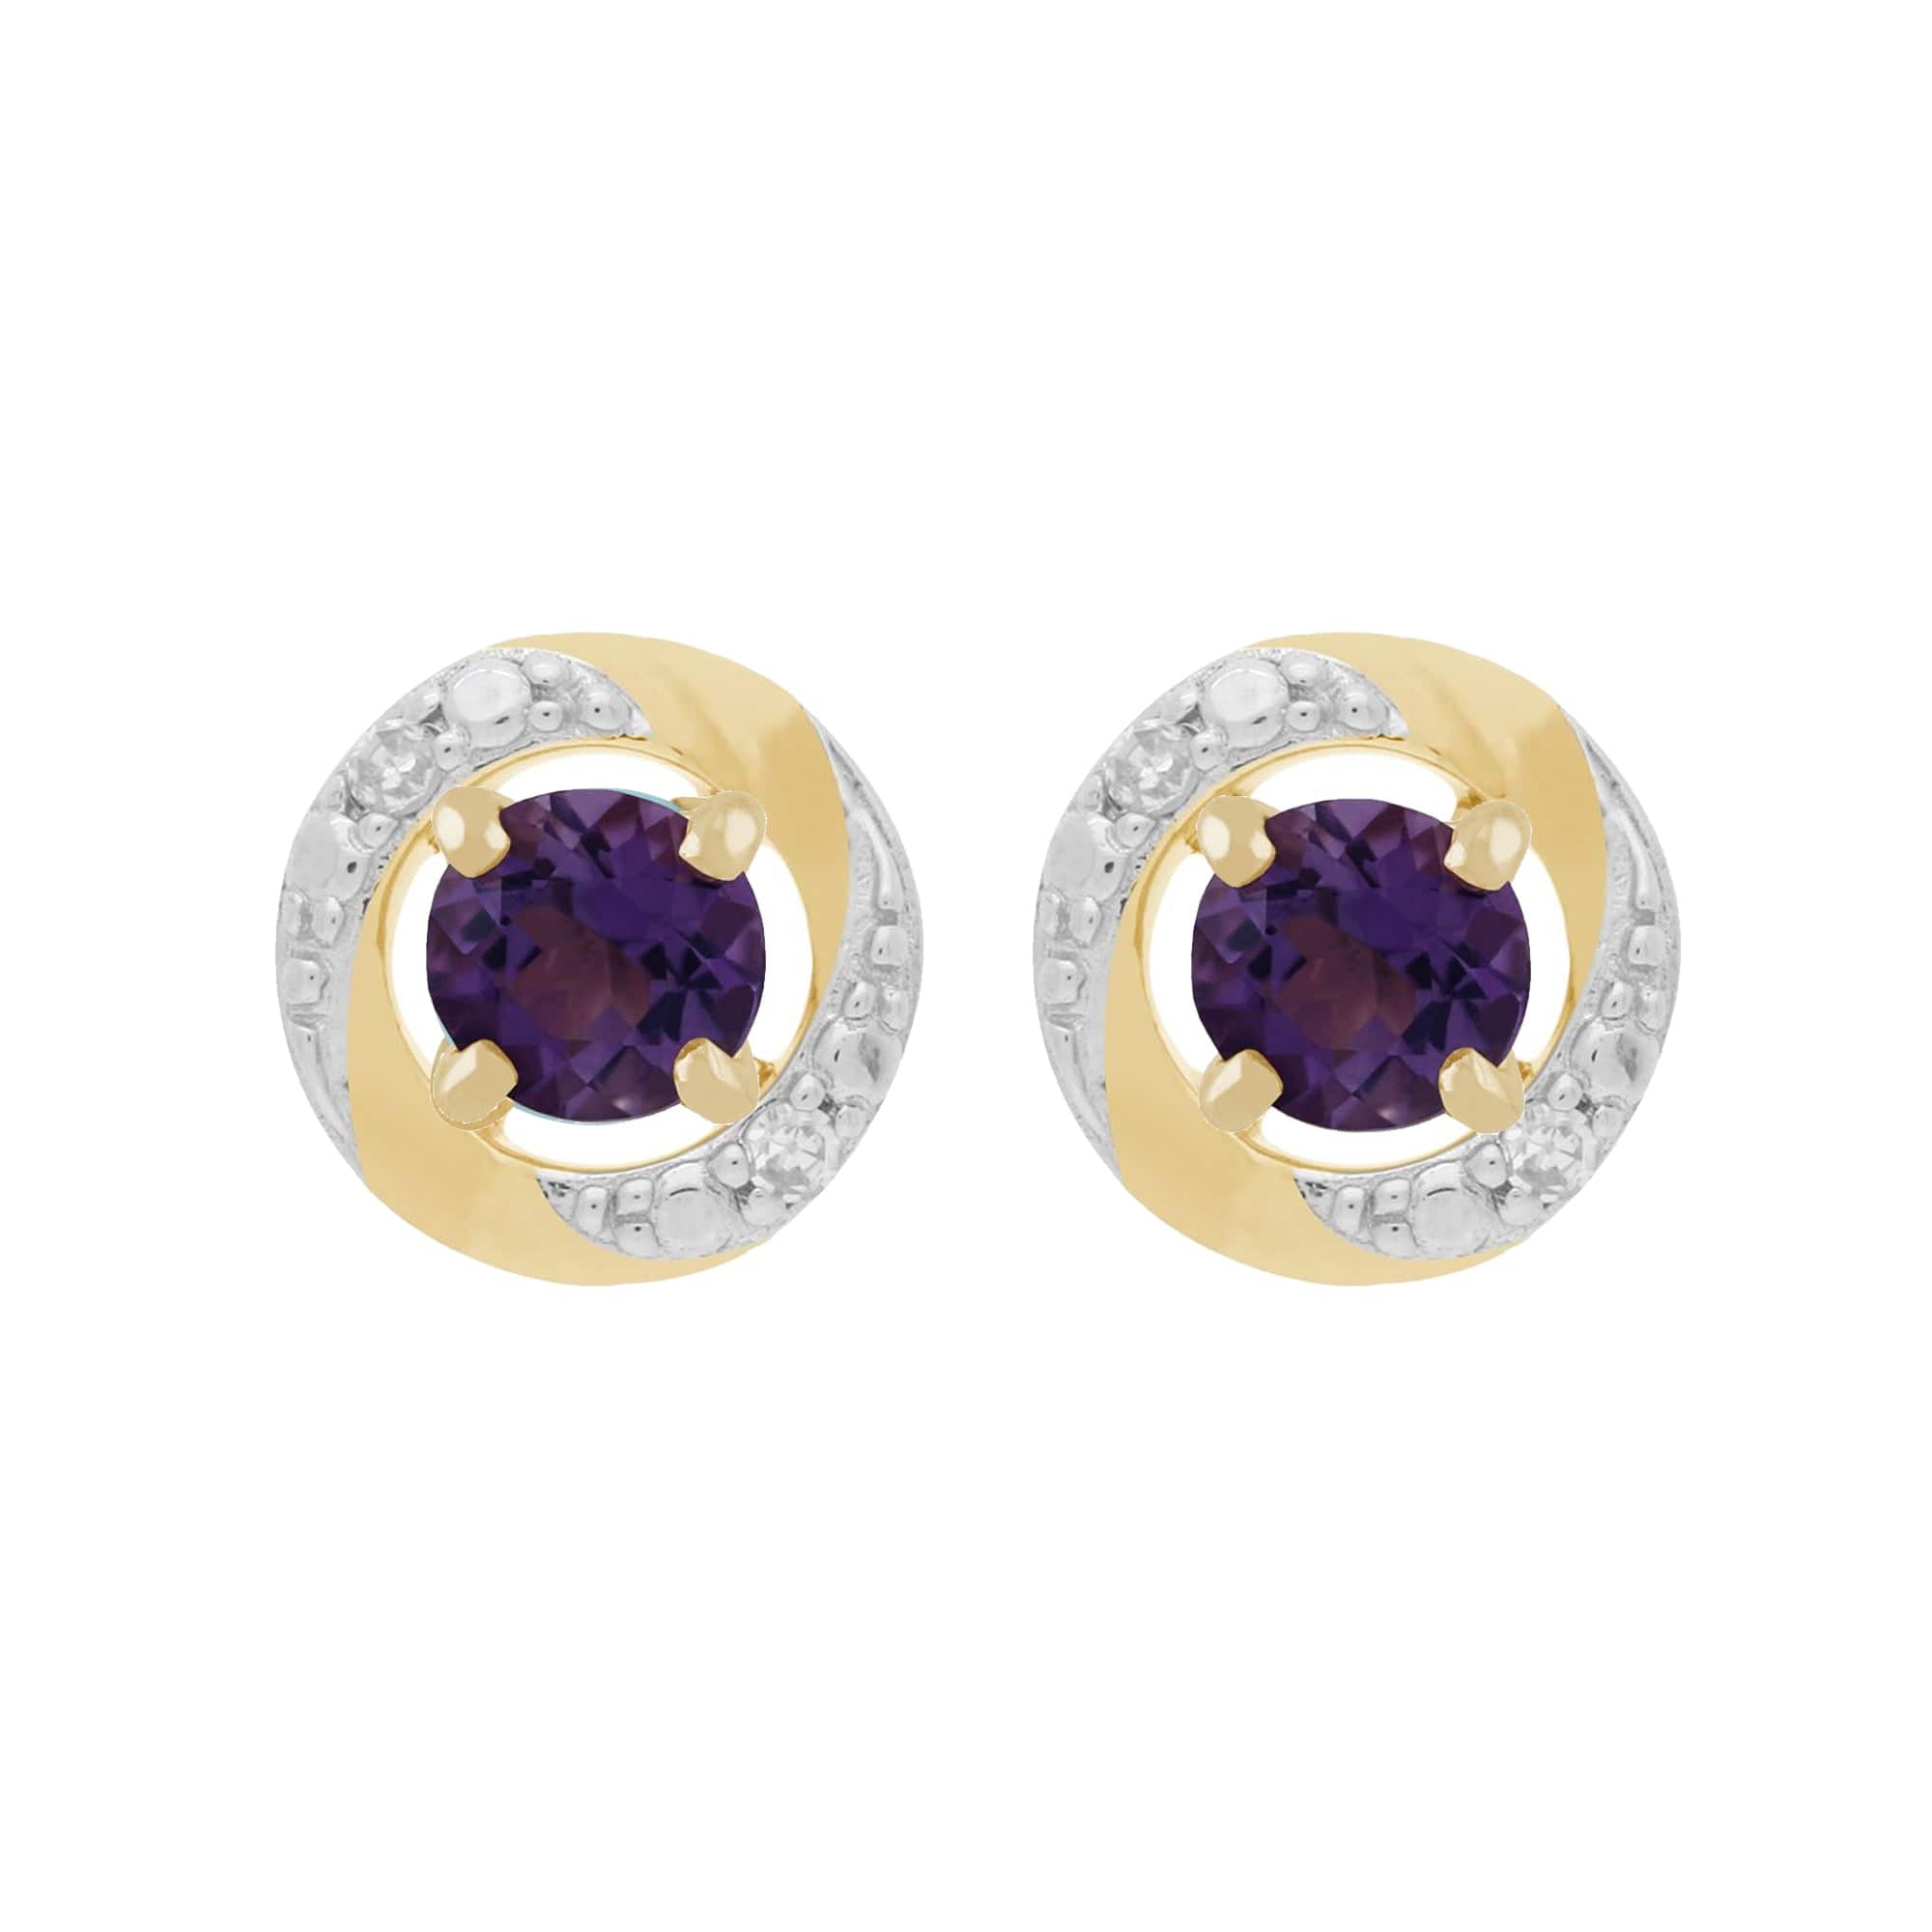 11560-191E0374019 Classic Round Amethyst Stud Earrings with Detachable Diamond Halo Ear Jacket in 9ct Yellow Gold 1